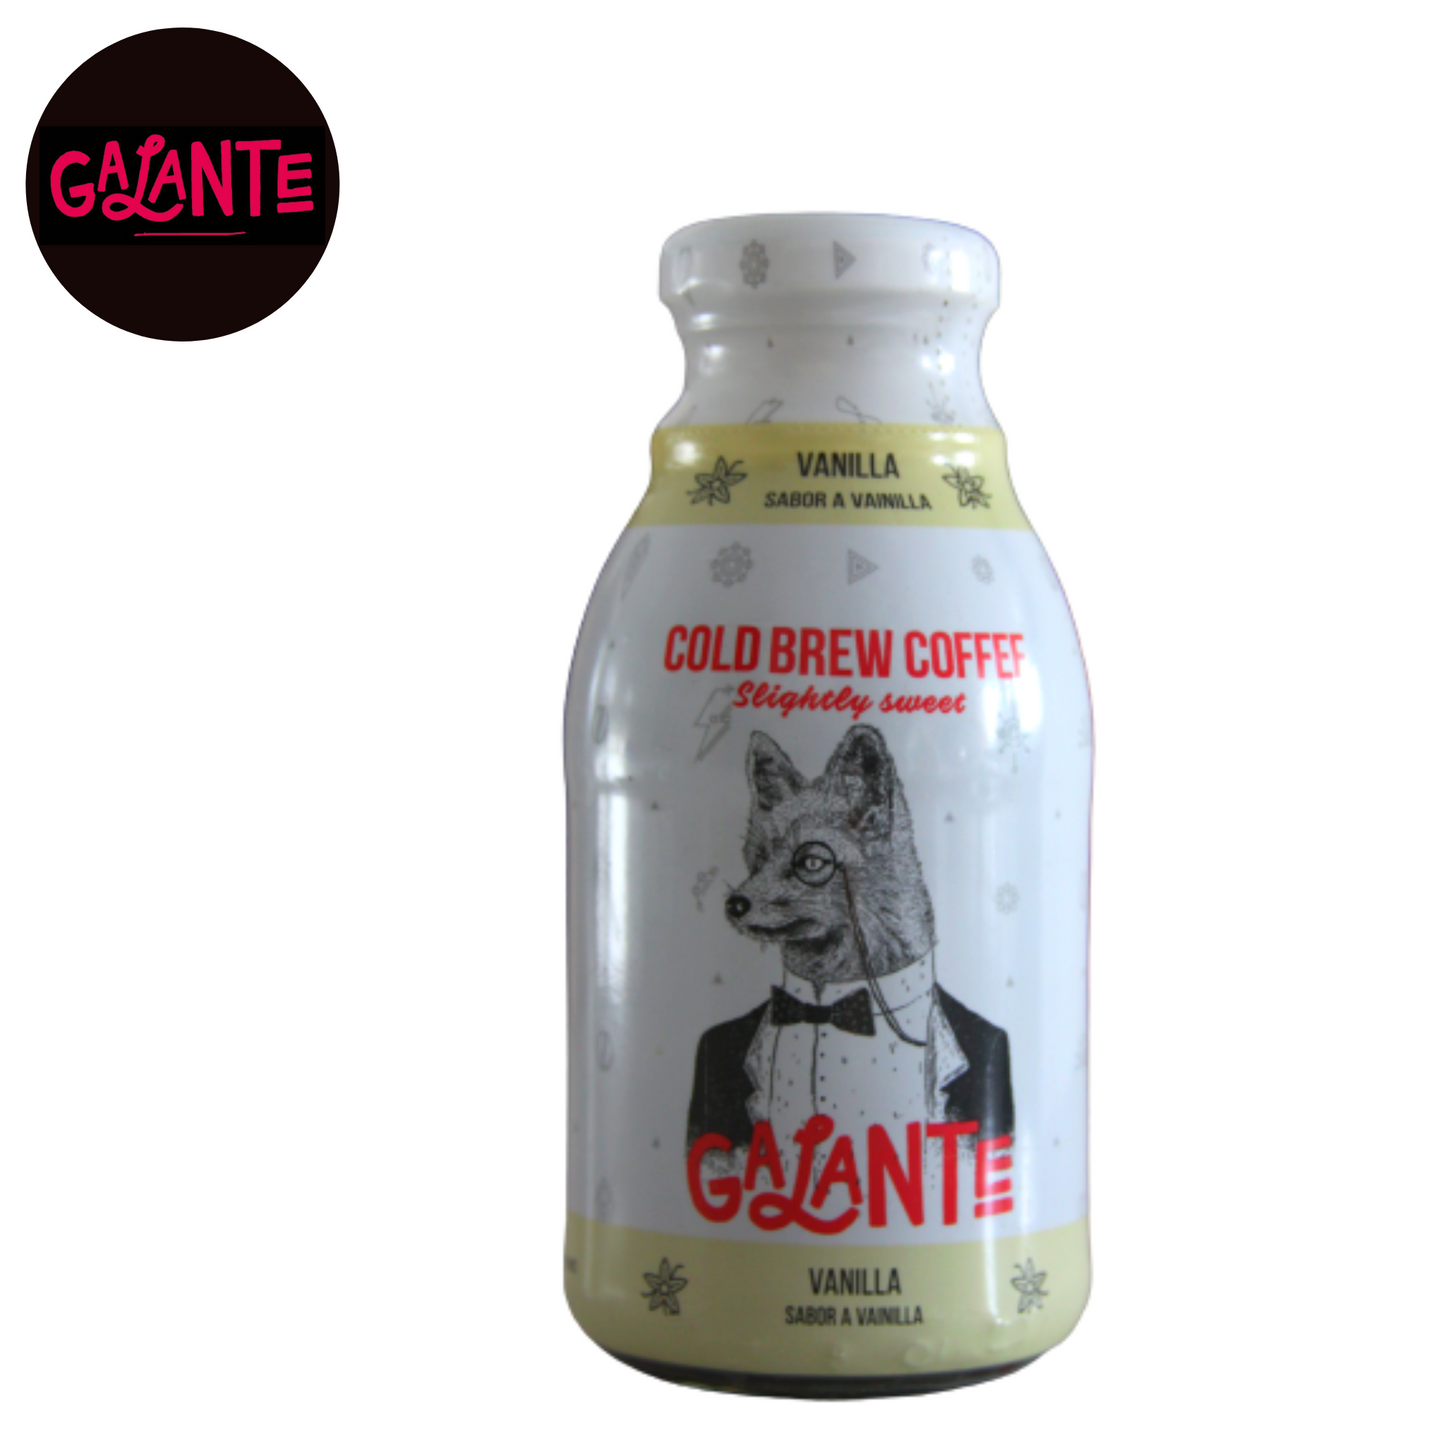 Galante Vainilla Cold Brew - 100% Colombian Coffee. Buy it here at Coffee Bean and Birds